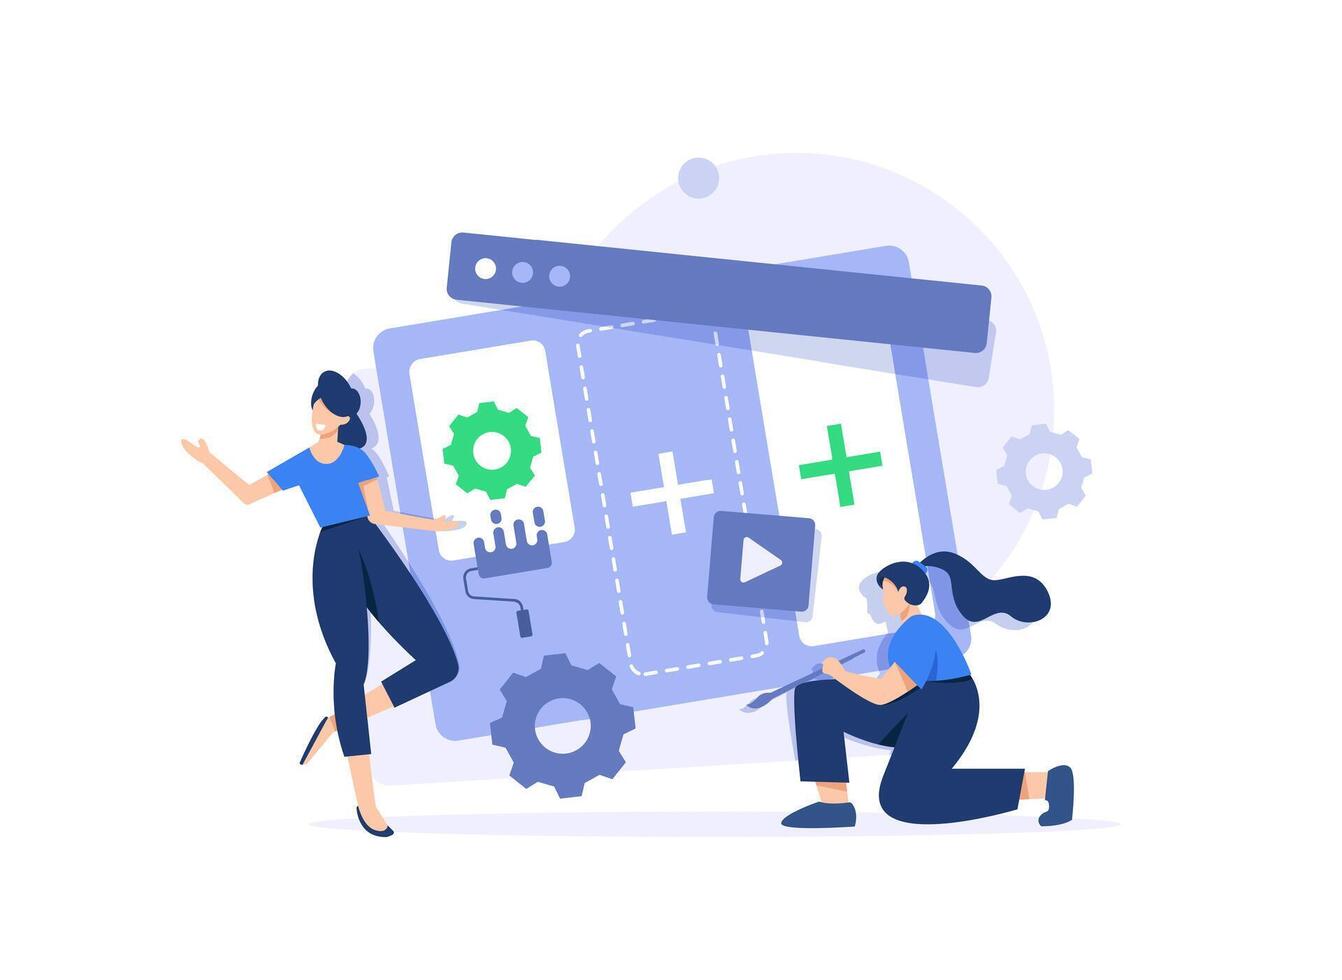 Set of UI and UX designers creating functional web interface design for websites and mobile apps,flat design icon vector illustration